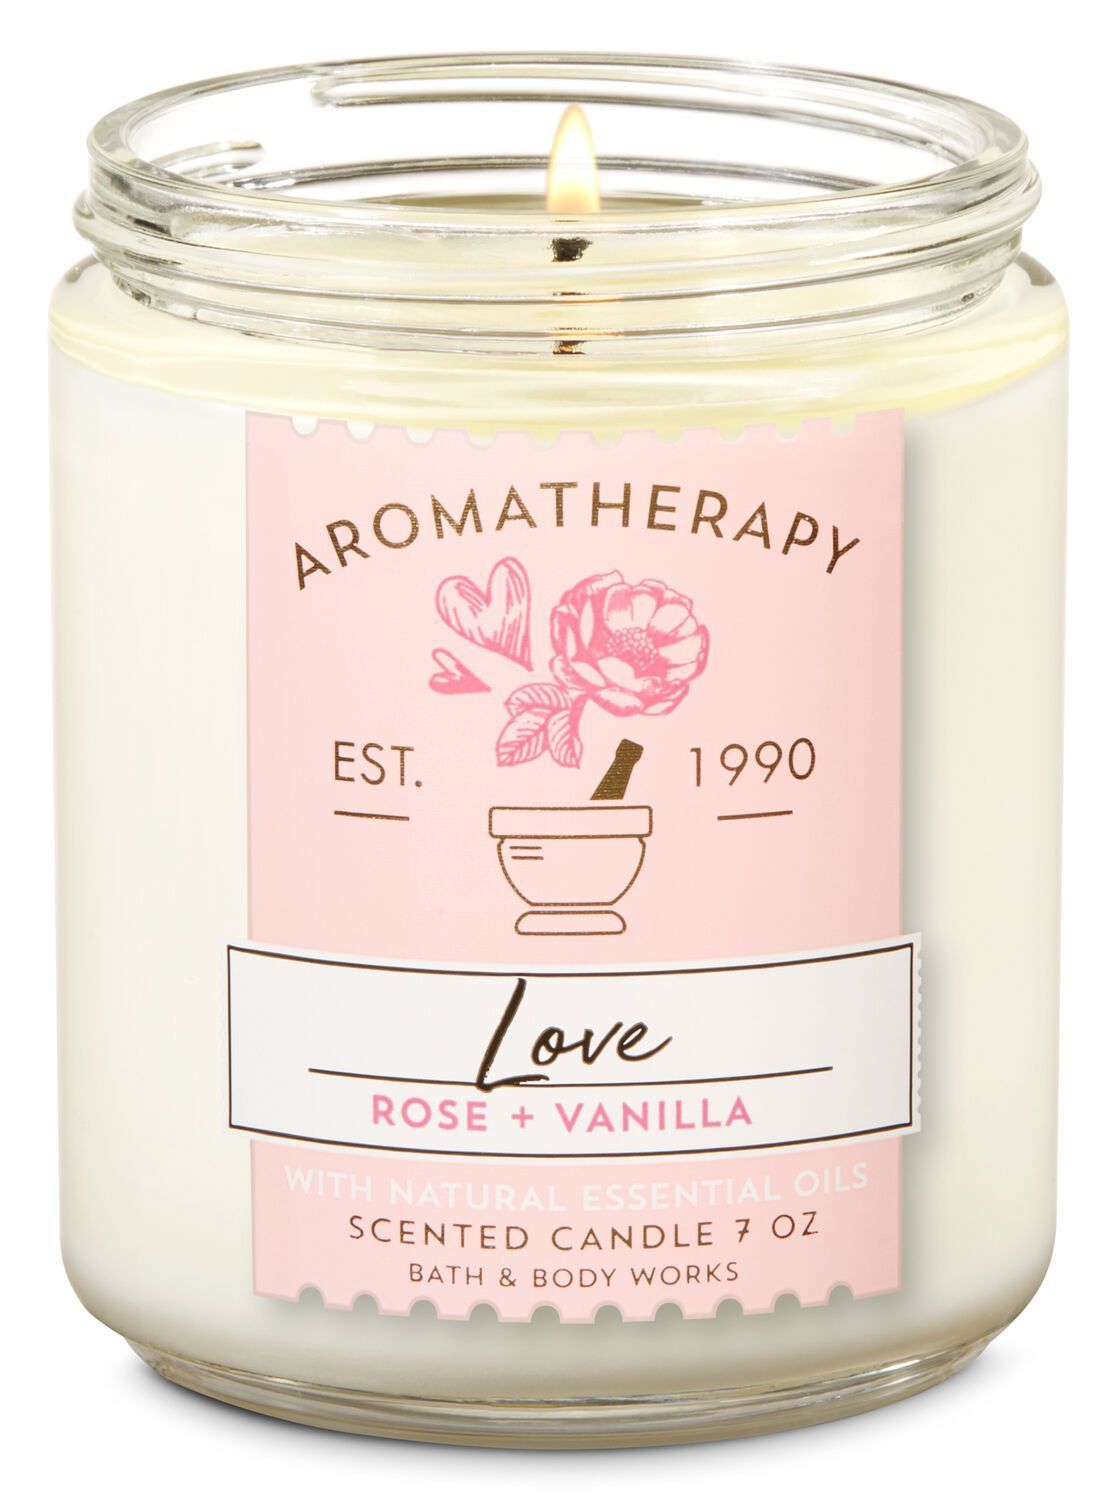 Rose Vanilla Single Wick Candle - Aromatherapy - Rose Vanilla Single Wick Candle - Aromatherapy -   19 diy Candles bath and body works ideas